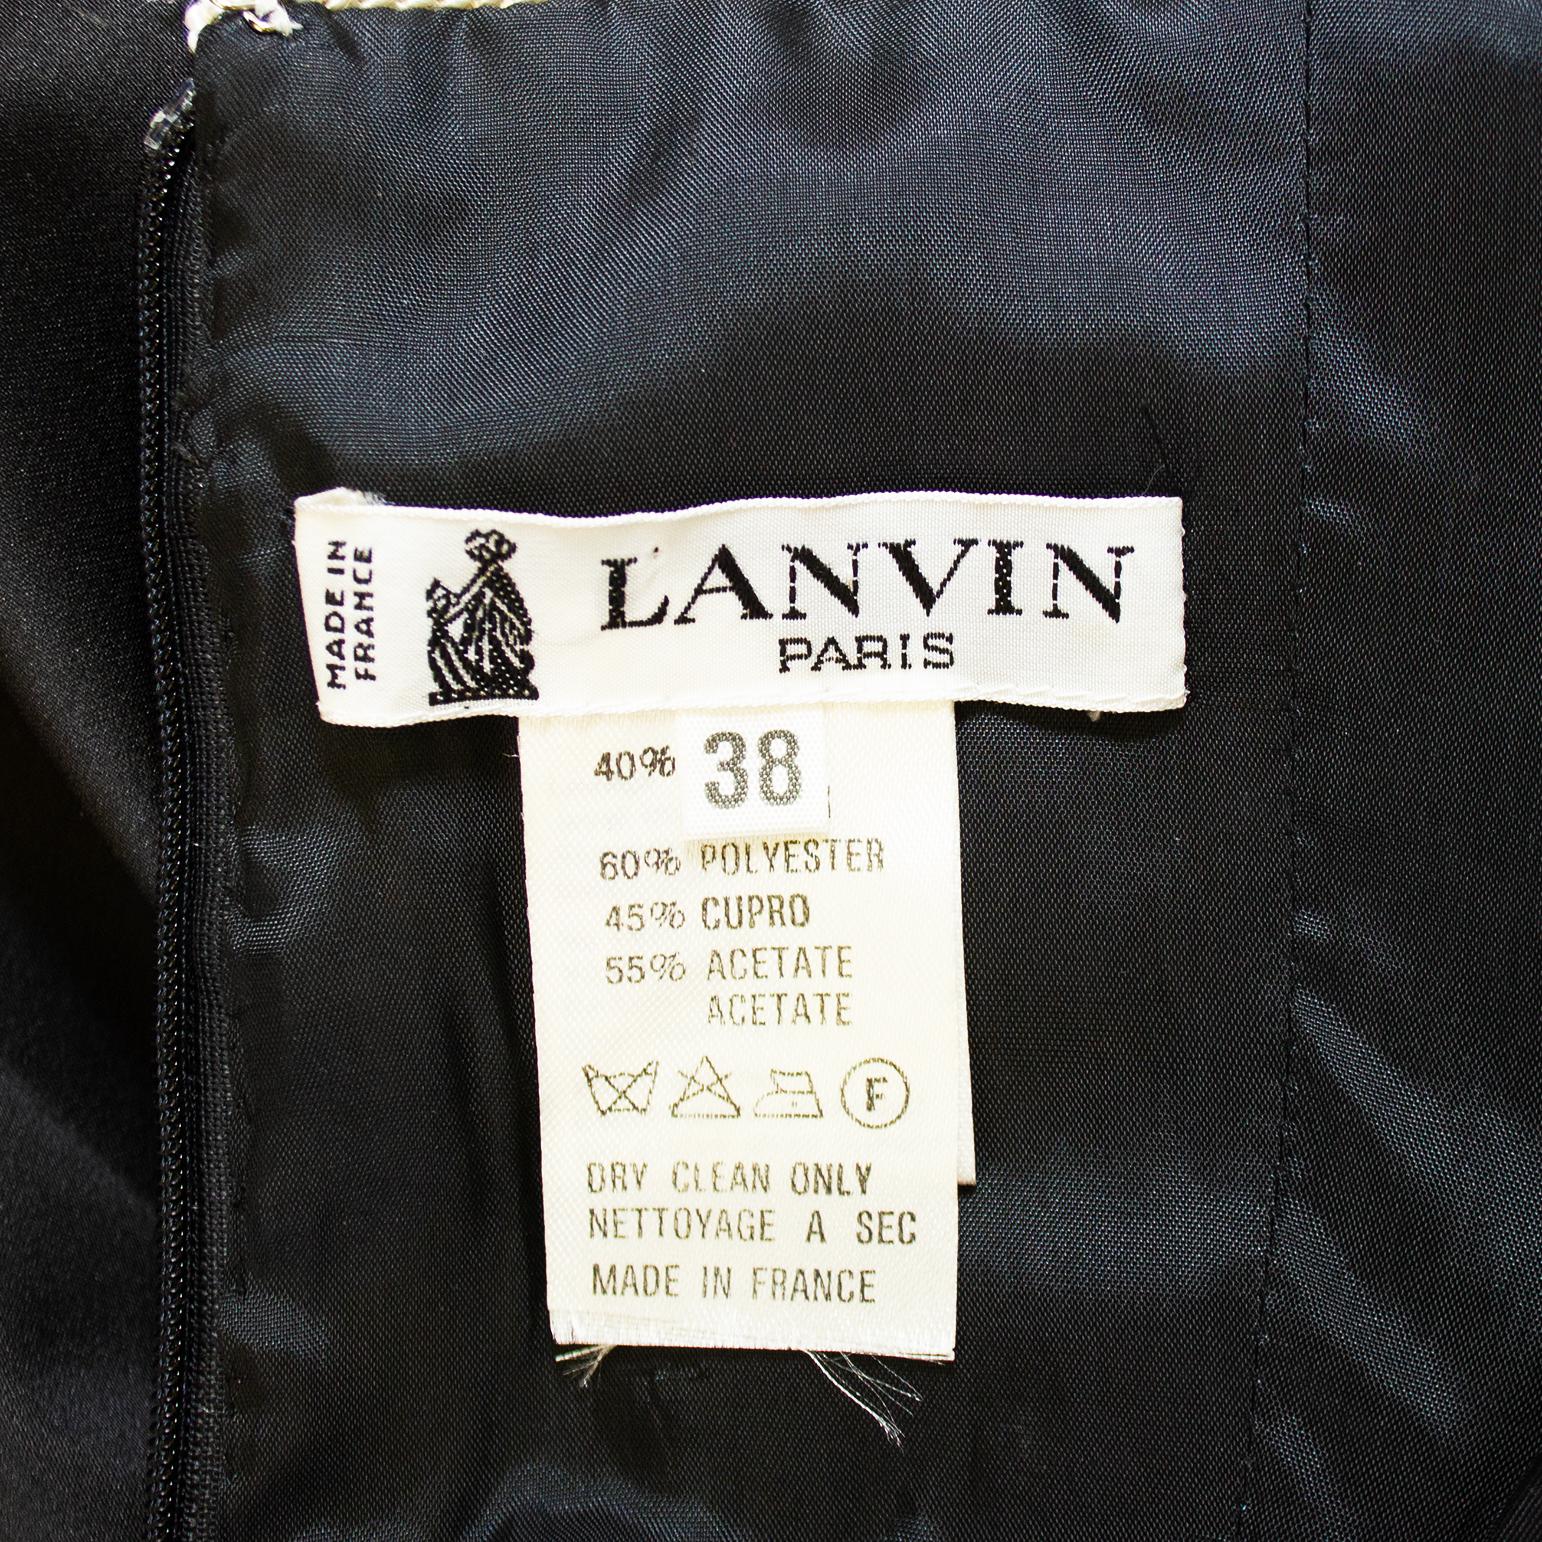 1980s Lanvin Black Satin Cocktail Dress with White Piping For Sale 3